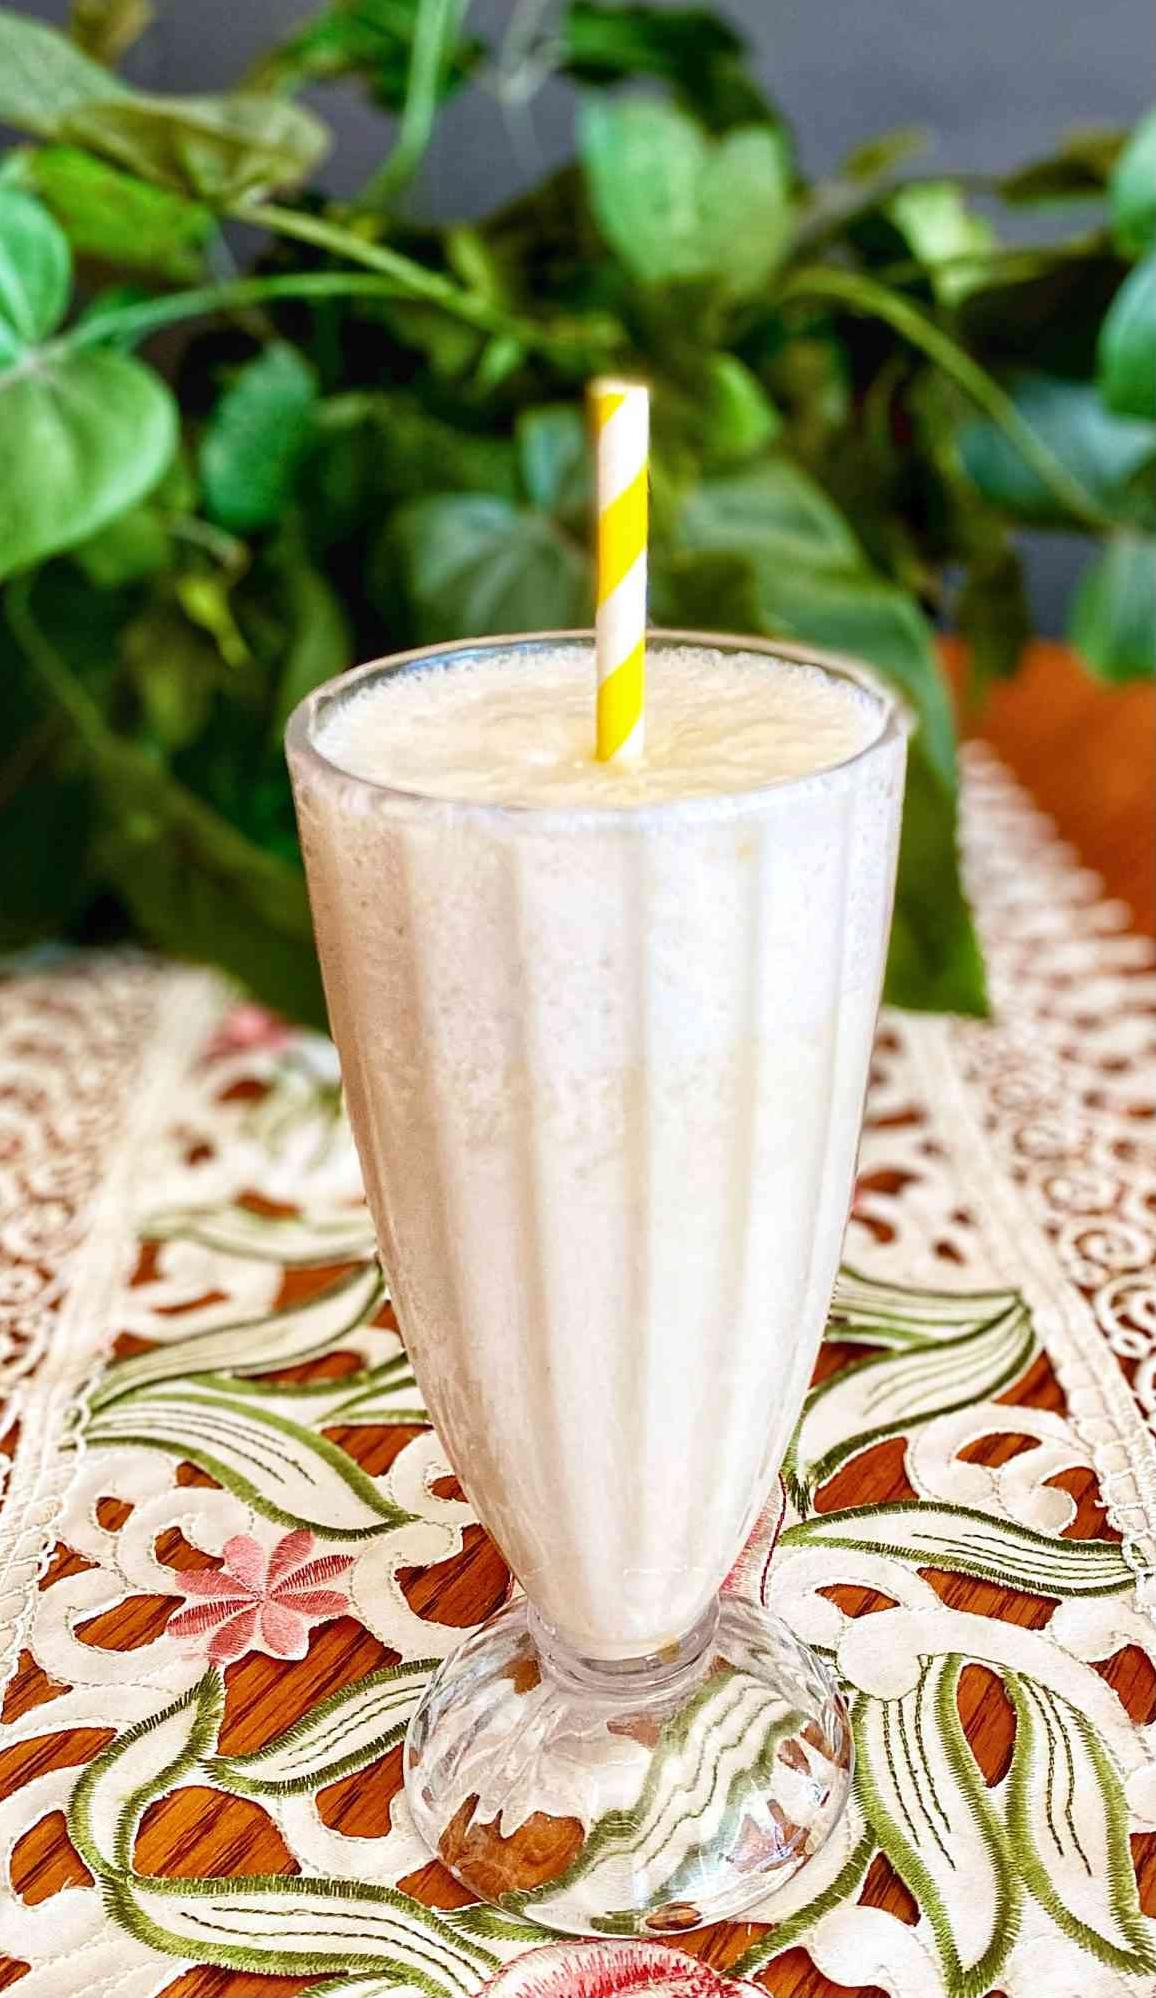  A frothy and delicious Vanilla Egg Cream, perfect for those avoiding dairy!